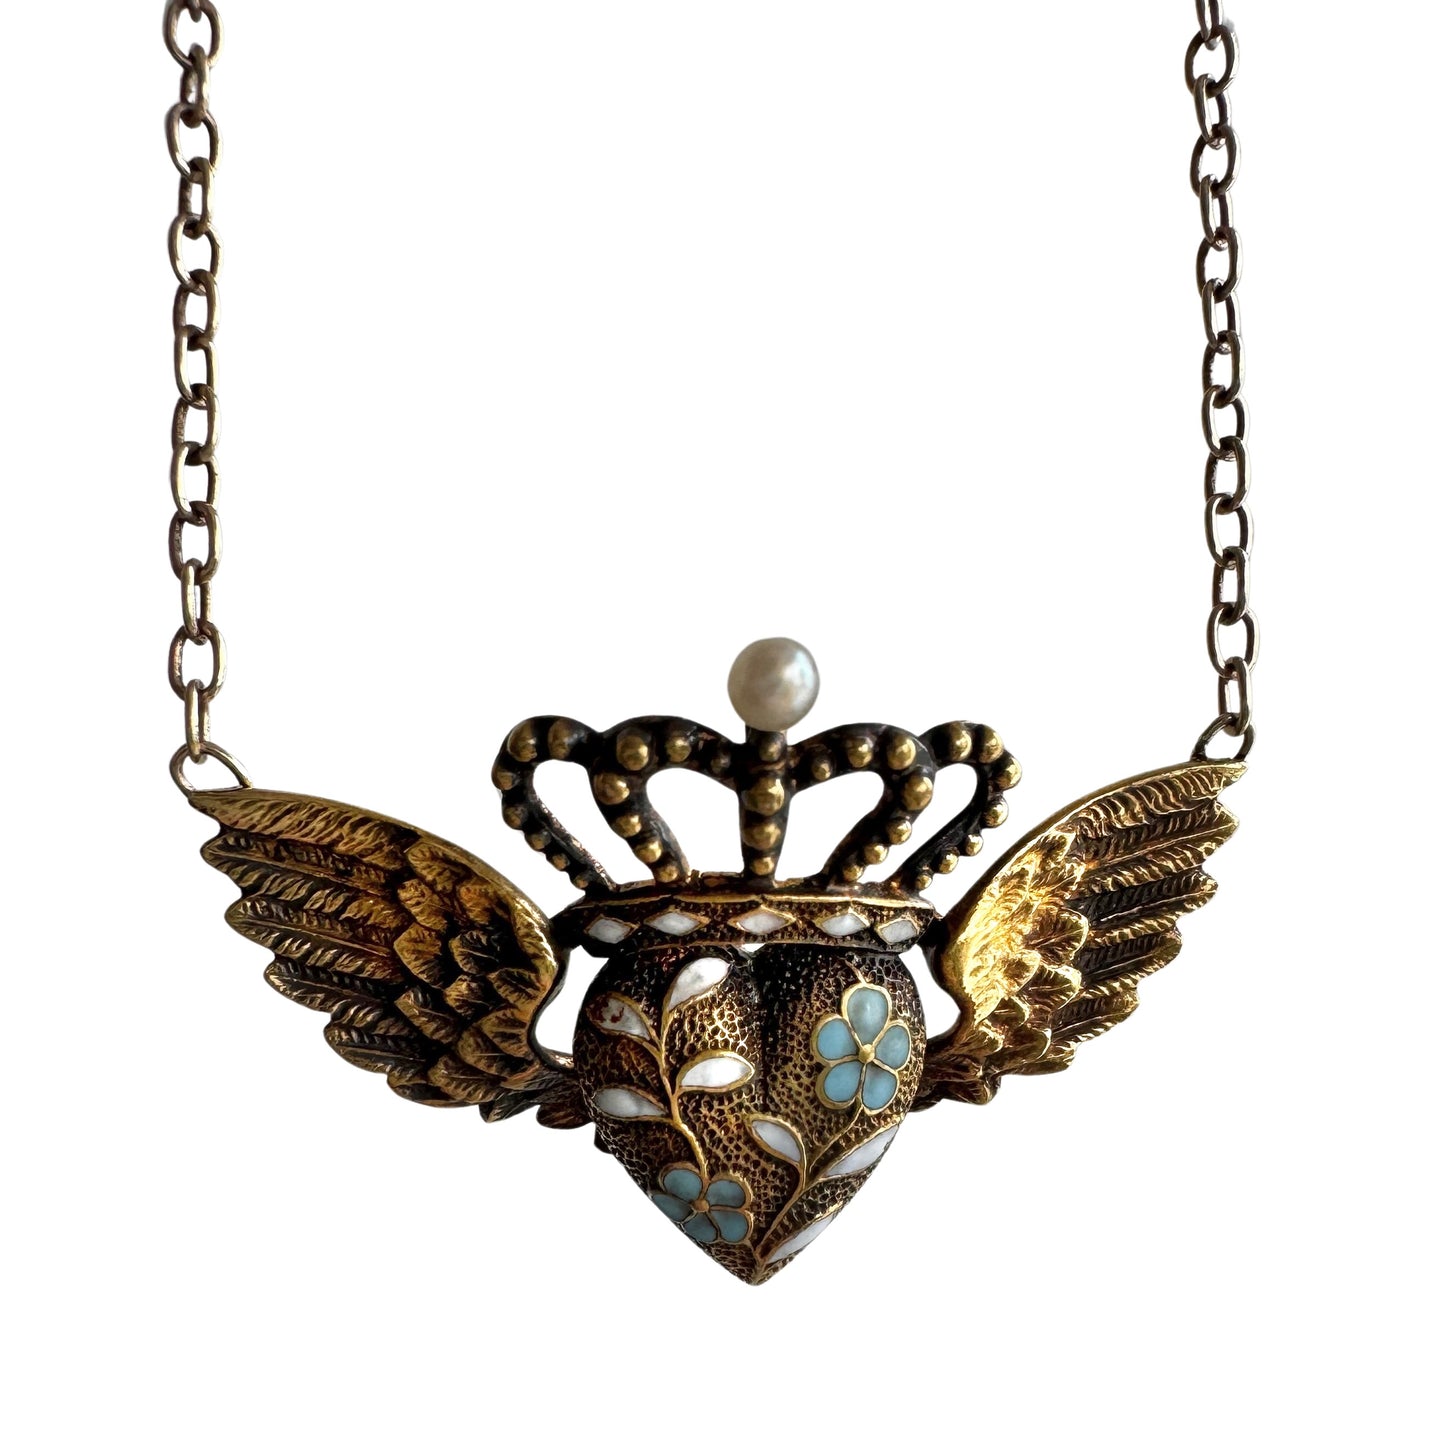 A N T I Q U E // love in flight / 10k and enamel winged and crowned heart / a conversion necklace